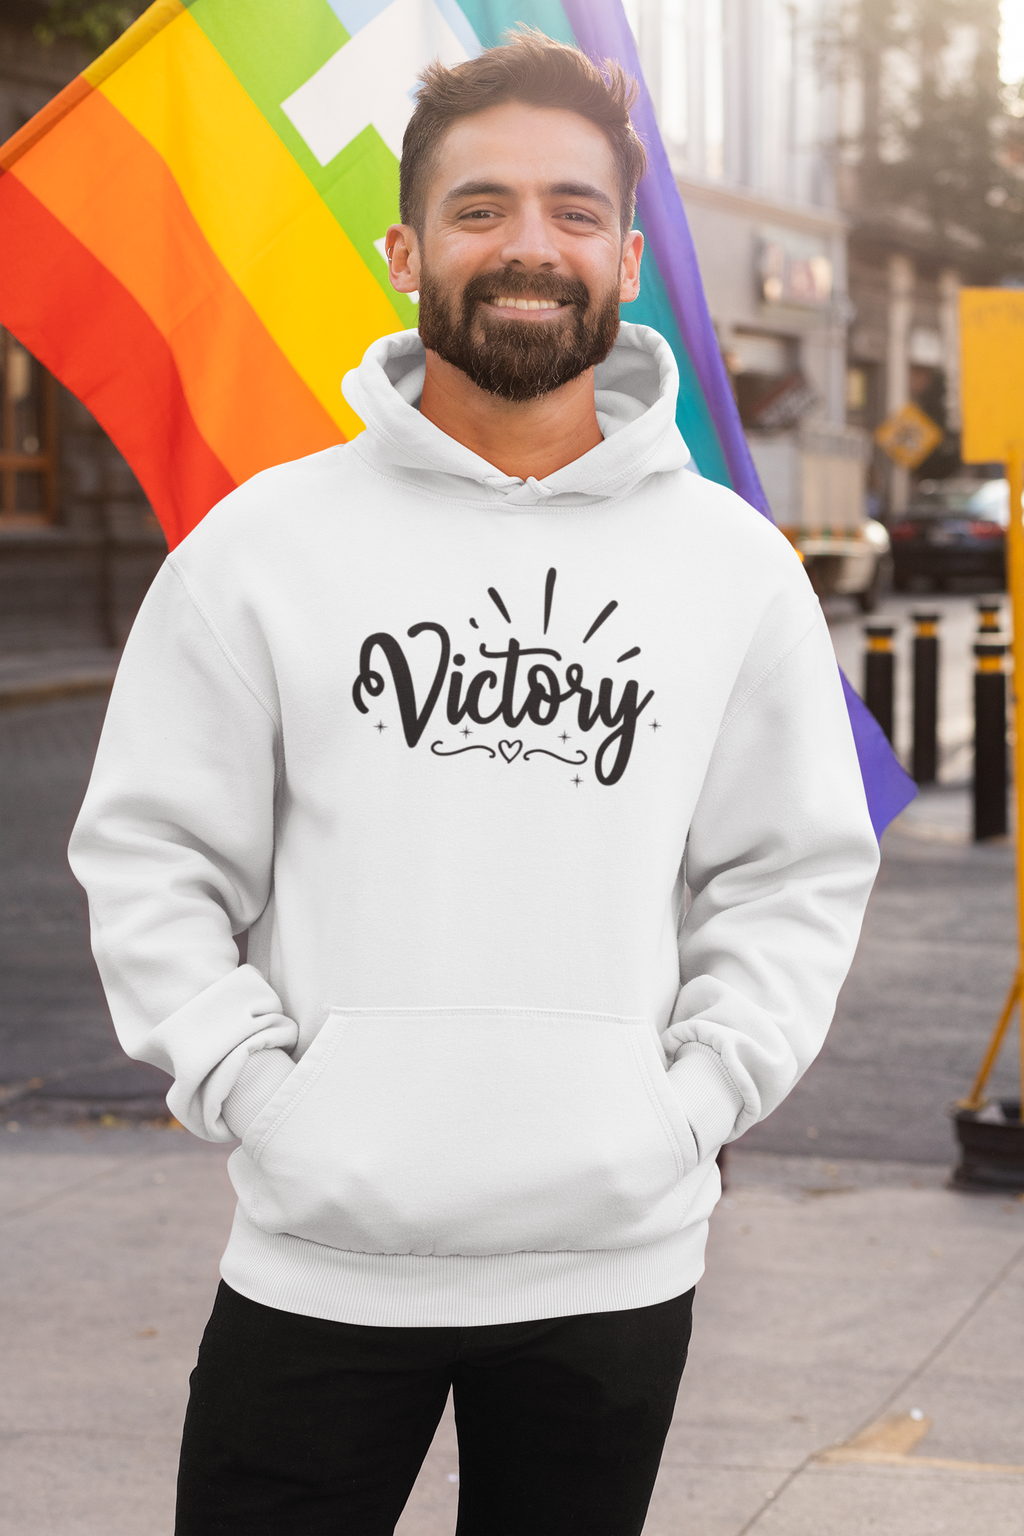 Victory Unisex Hooded Sweatshirt, Classic Fit, Gift Item - Cheers Together Gift House